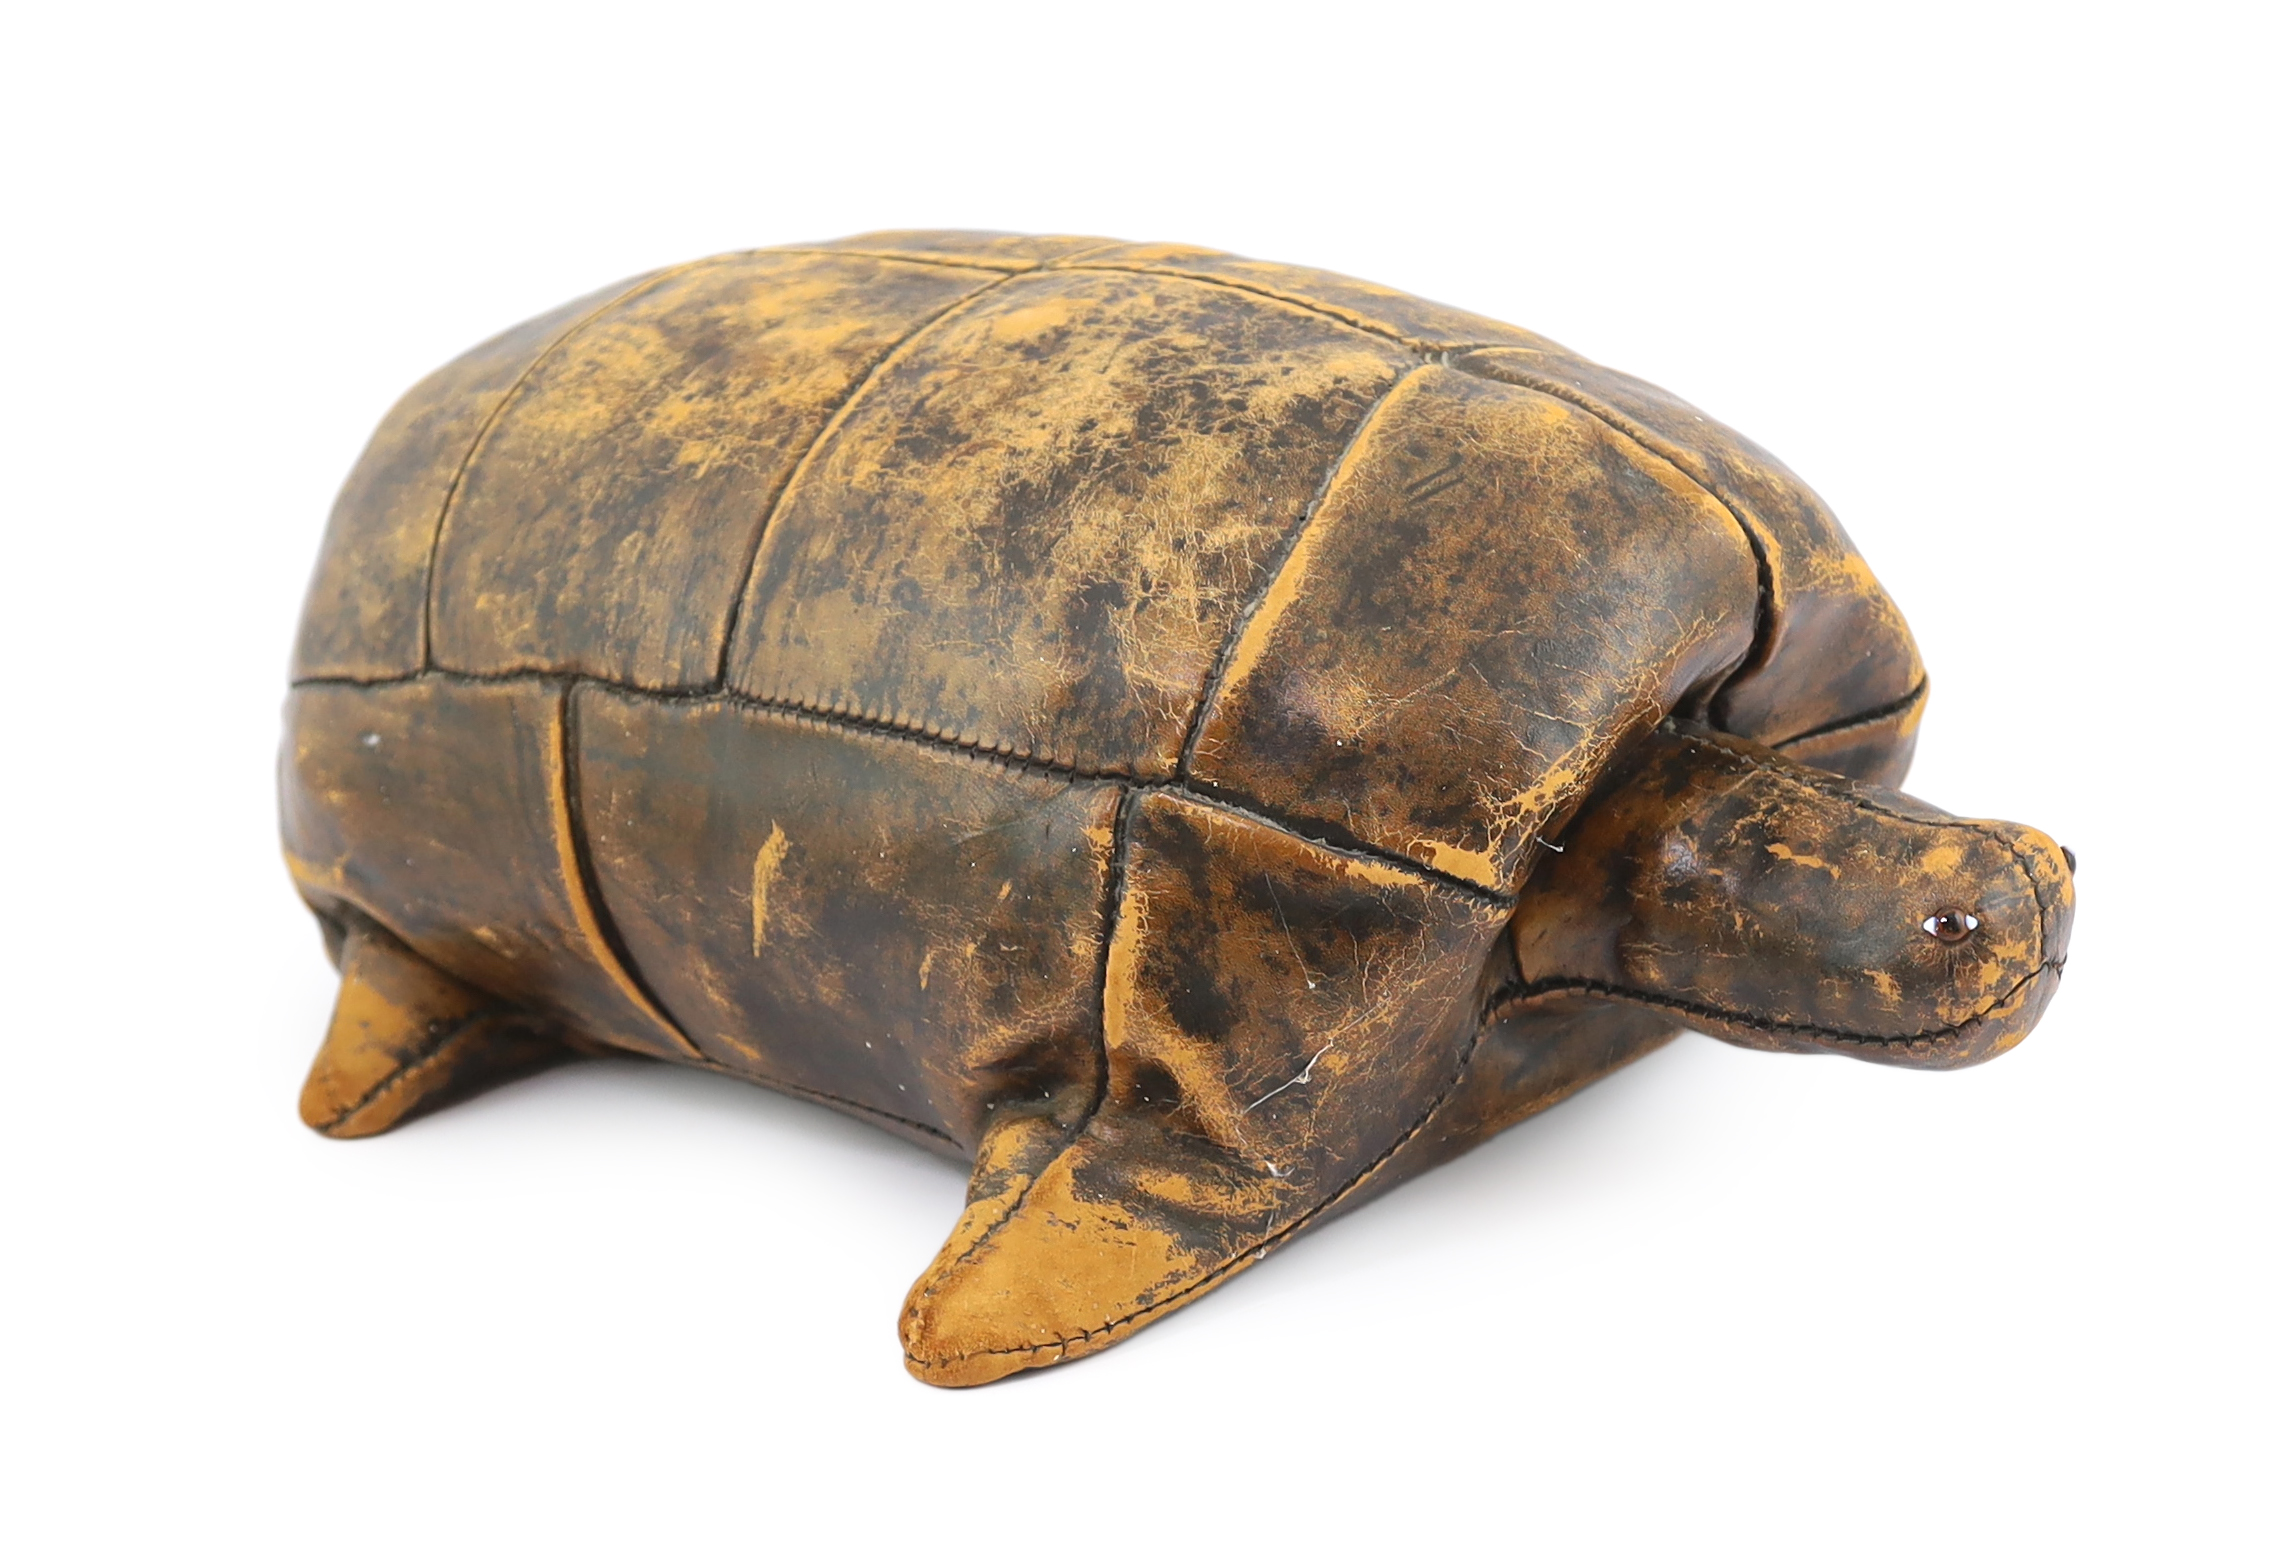 Omersa for Liberty & Co., a brown leather model of a tortoise